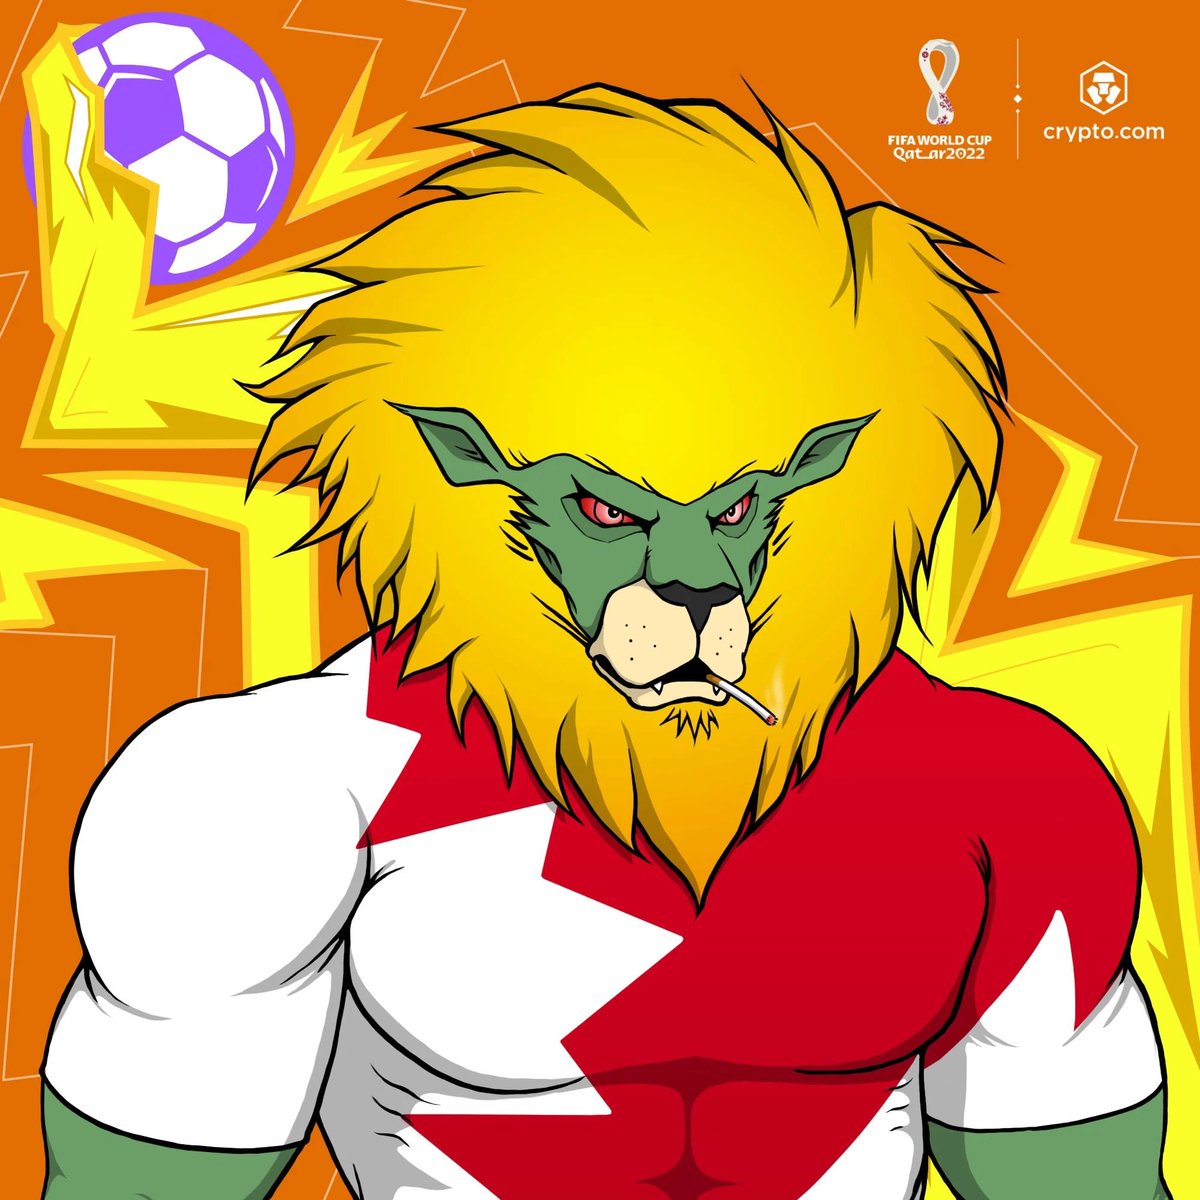 Picked up this #MatchReadyLions on secondary from @cryptocomnft to show support for my Canadian friends to the North. Lot's of Love for those Guys and Gals. #crofam #CRO #LoadedLions #FIFAWorldCup